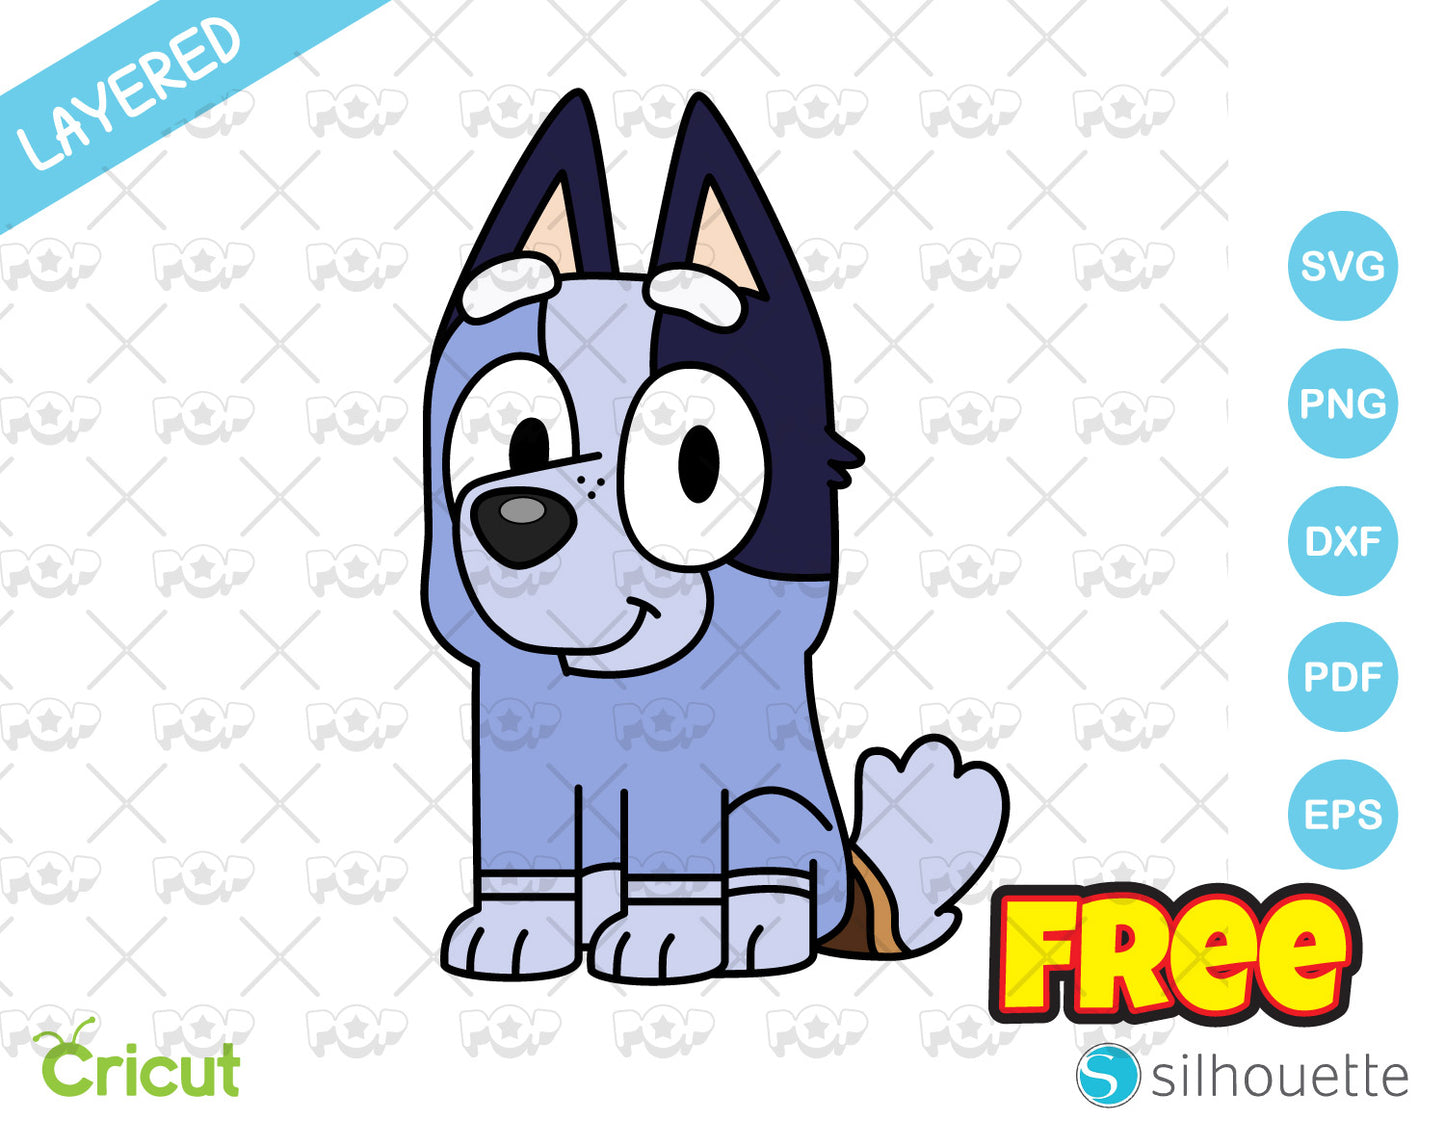 FREE Bluey clipart, Free Bluey dog SVG cut files for cricut silhouette, SVG, PNG, DXF, instant download